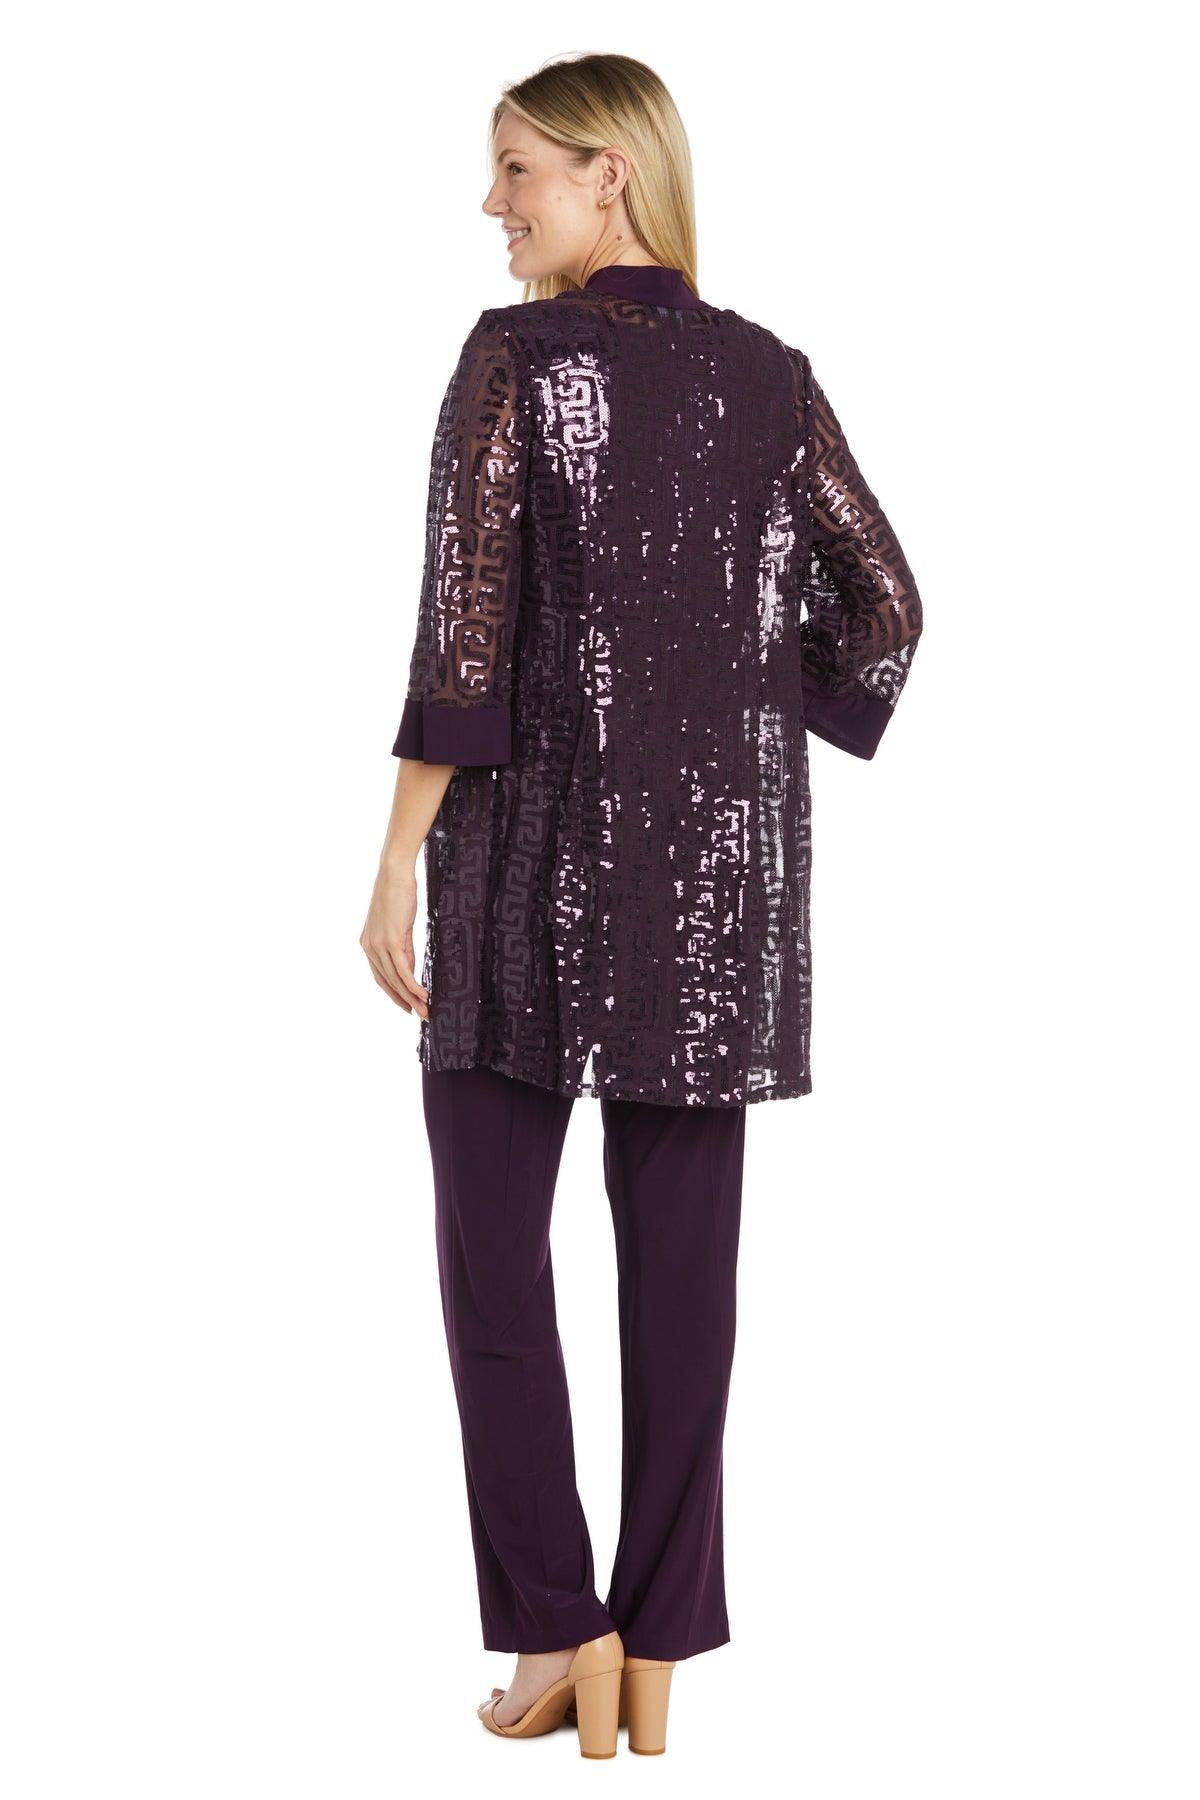 R&M Richards RM9761W Sequined Formal Pantsuit for $49.99 – The Dress Outlet